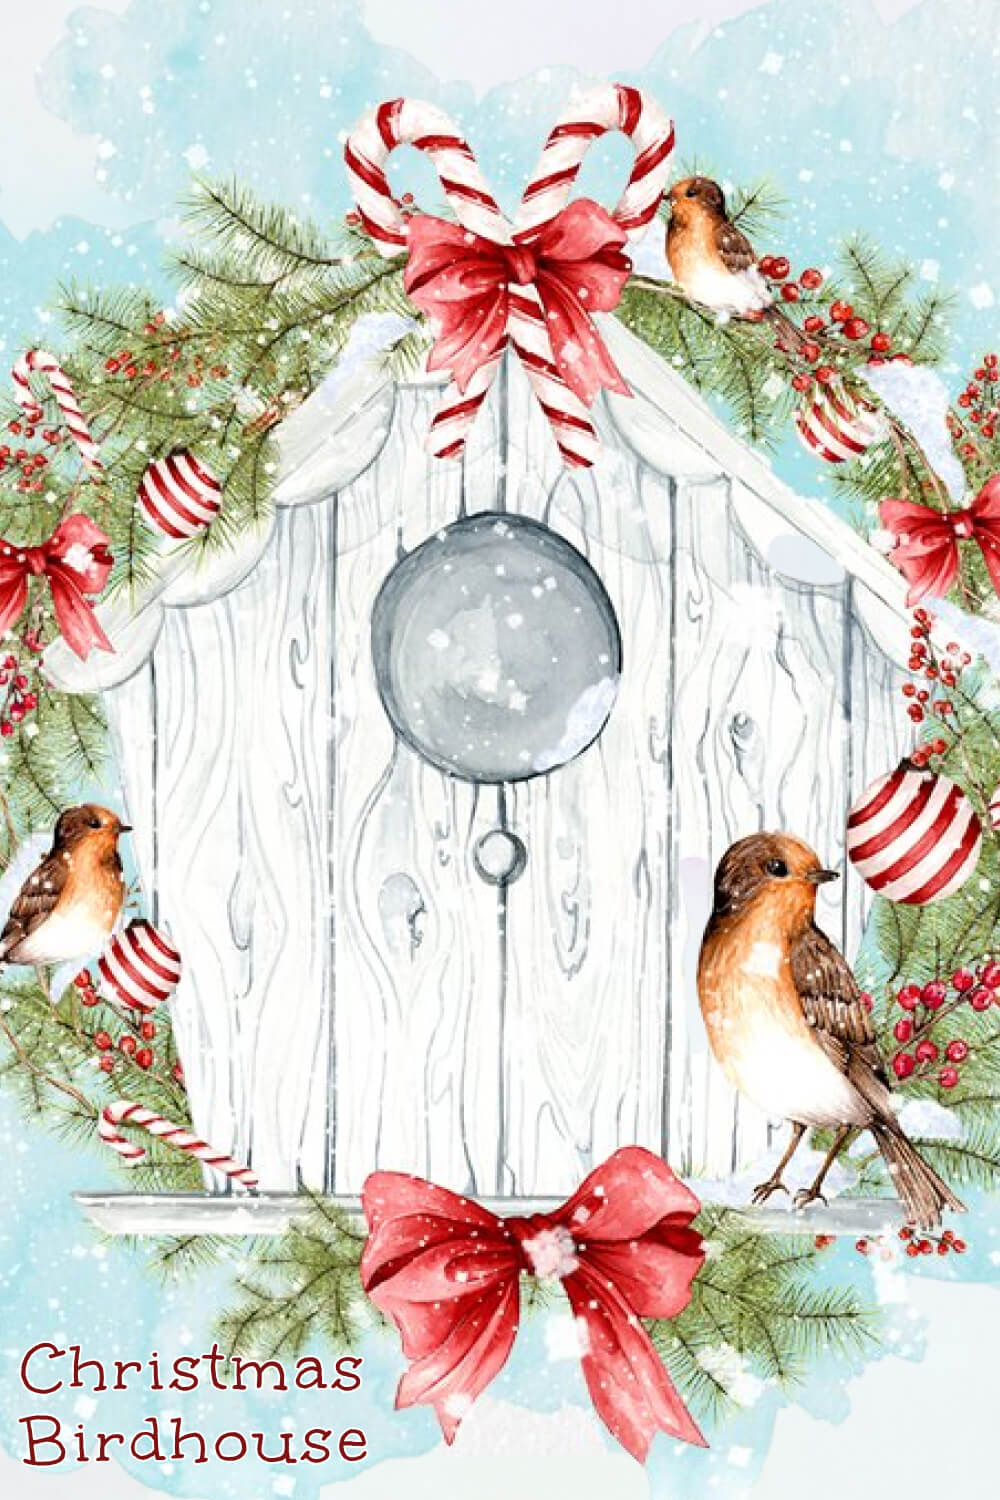 A large birdhouse is Christmas-style decorated for small birds.